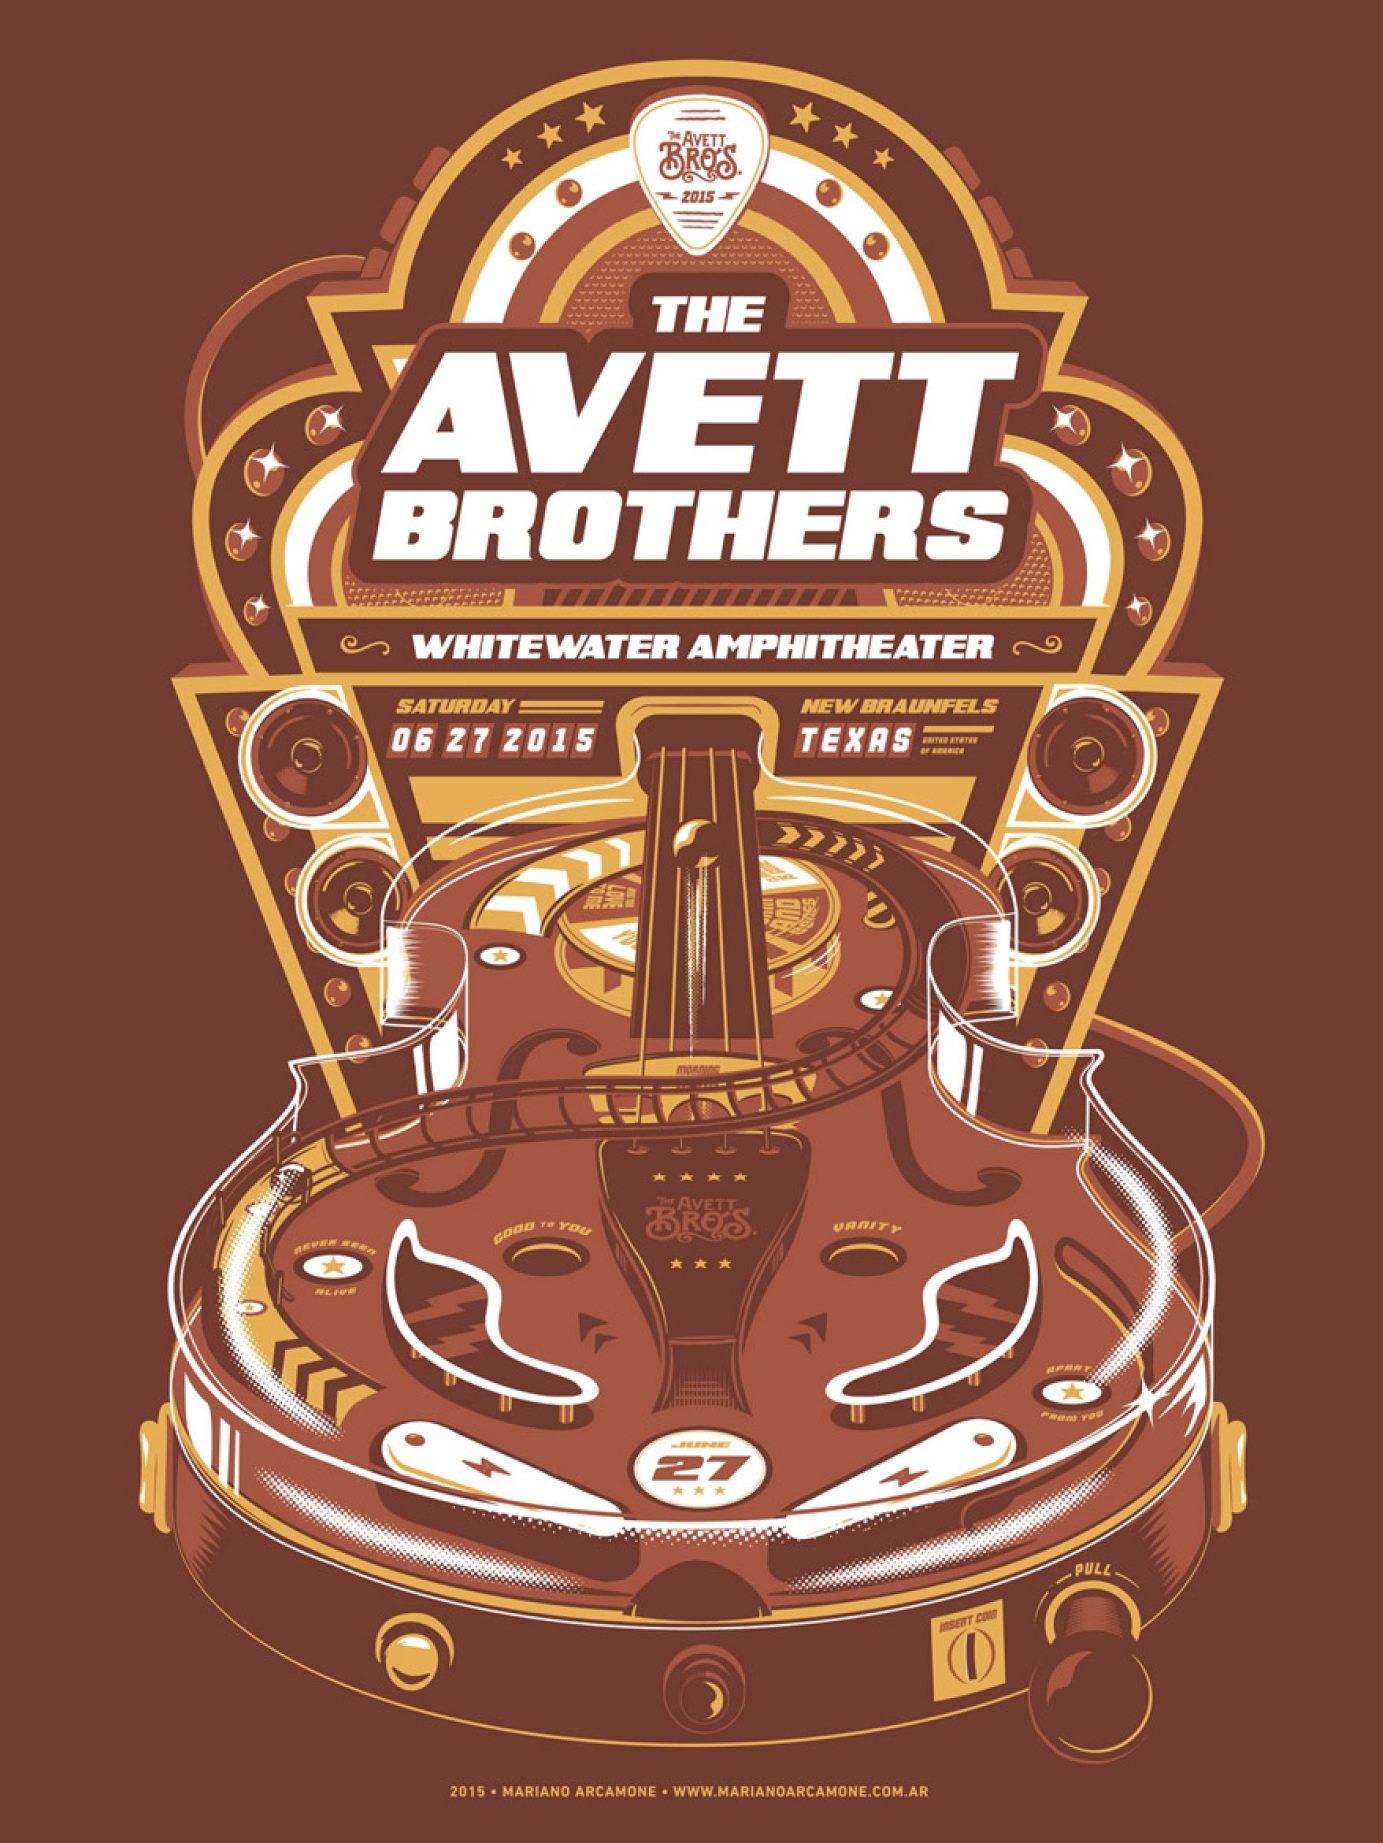 Merchandise for The Avett Brothers by Mariano Arcamone